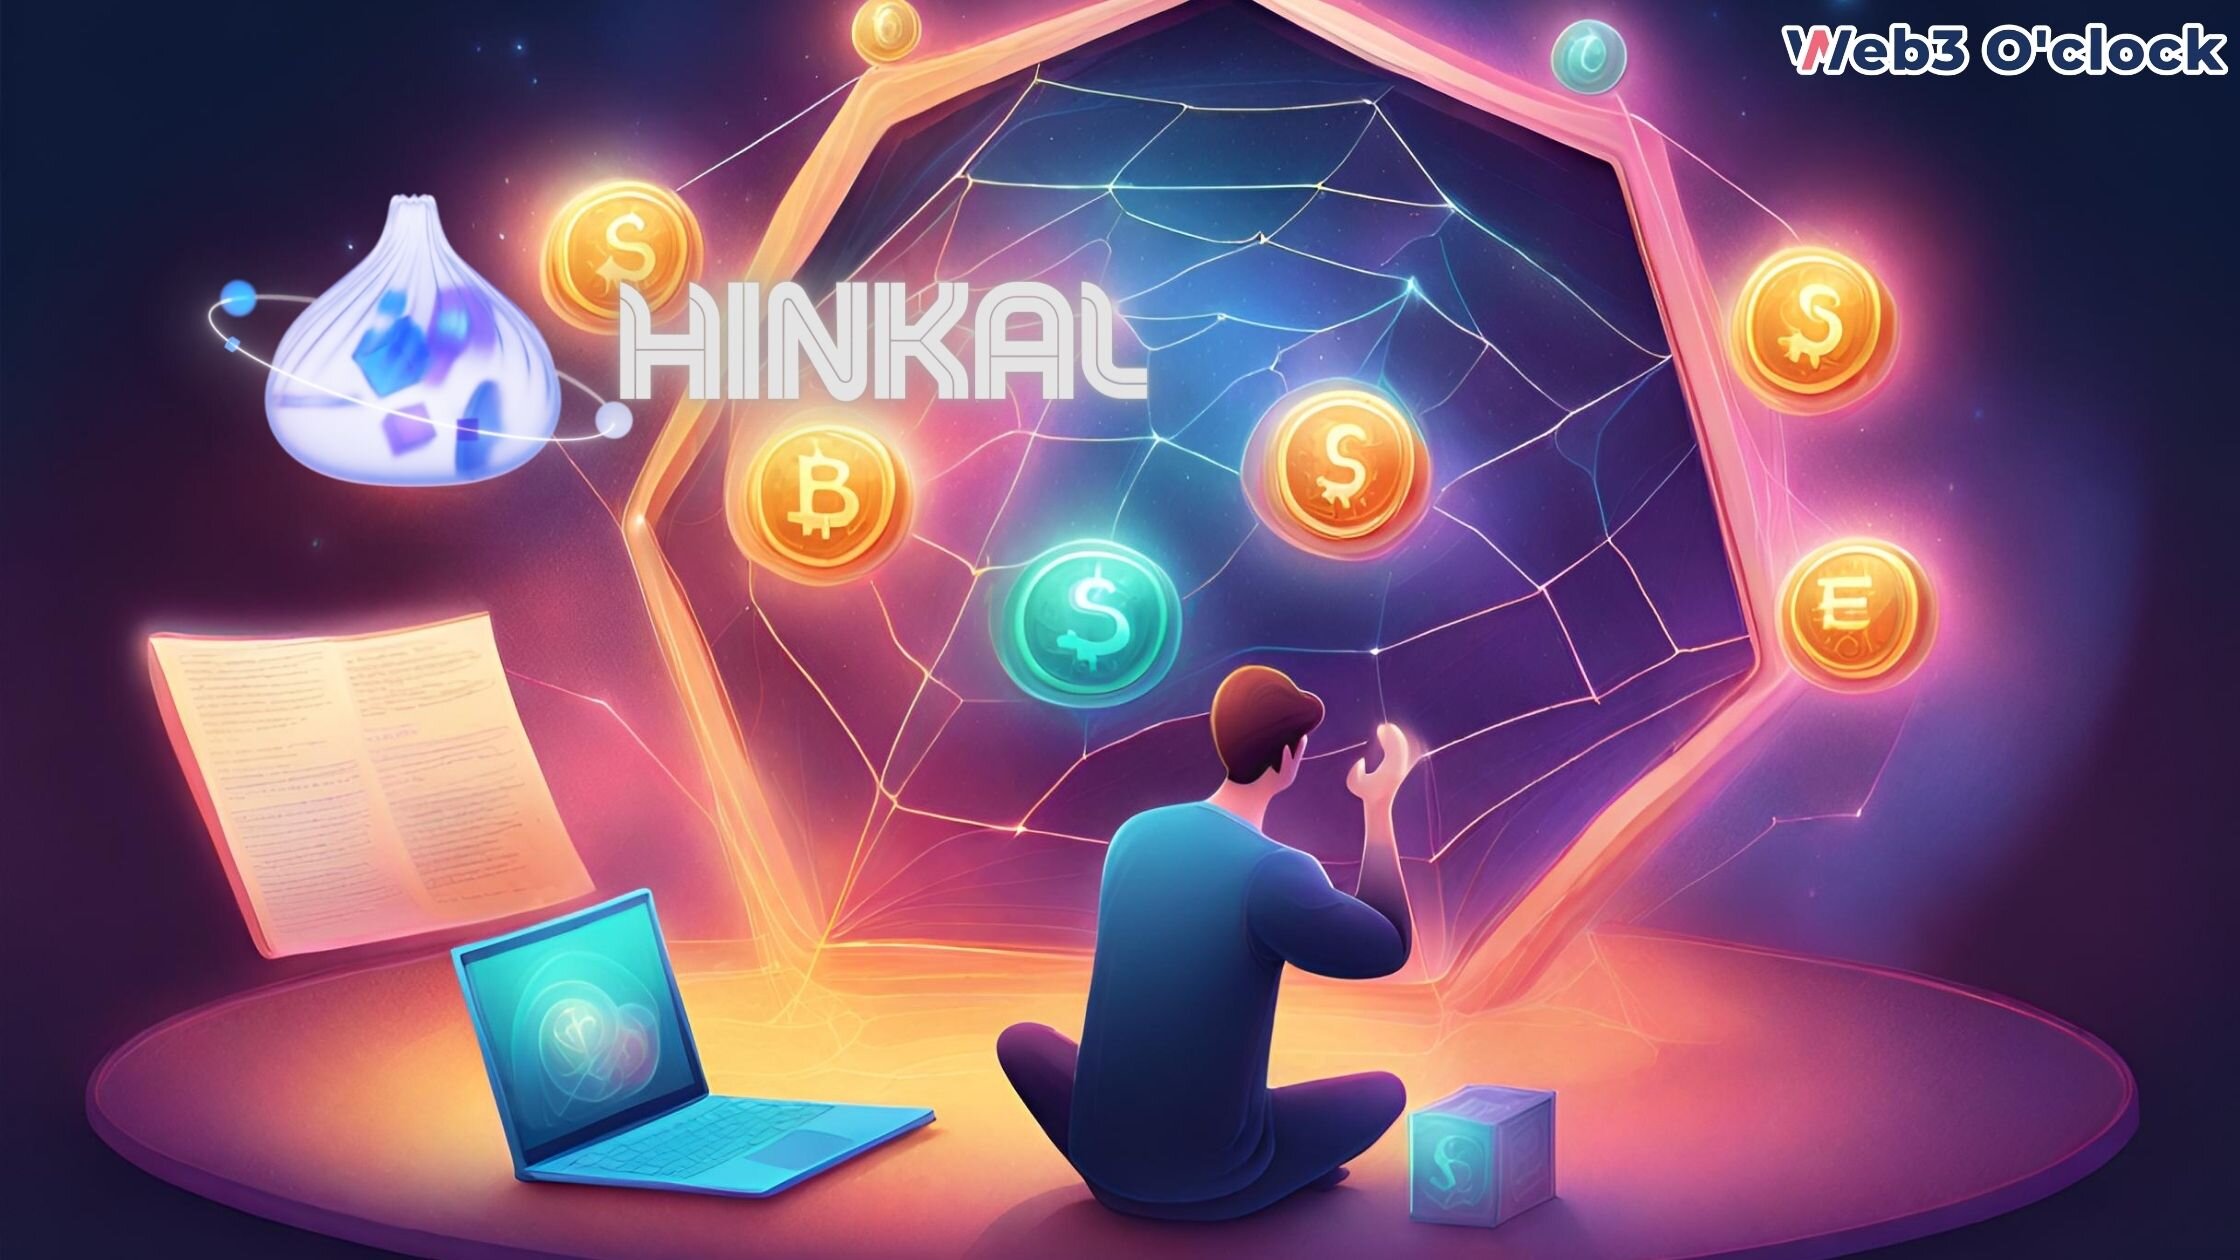 Hinkal Secures $4.1M by Web3oclock